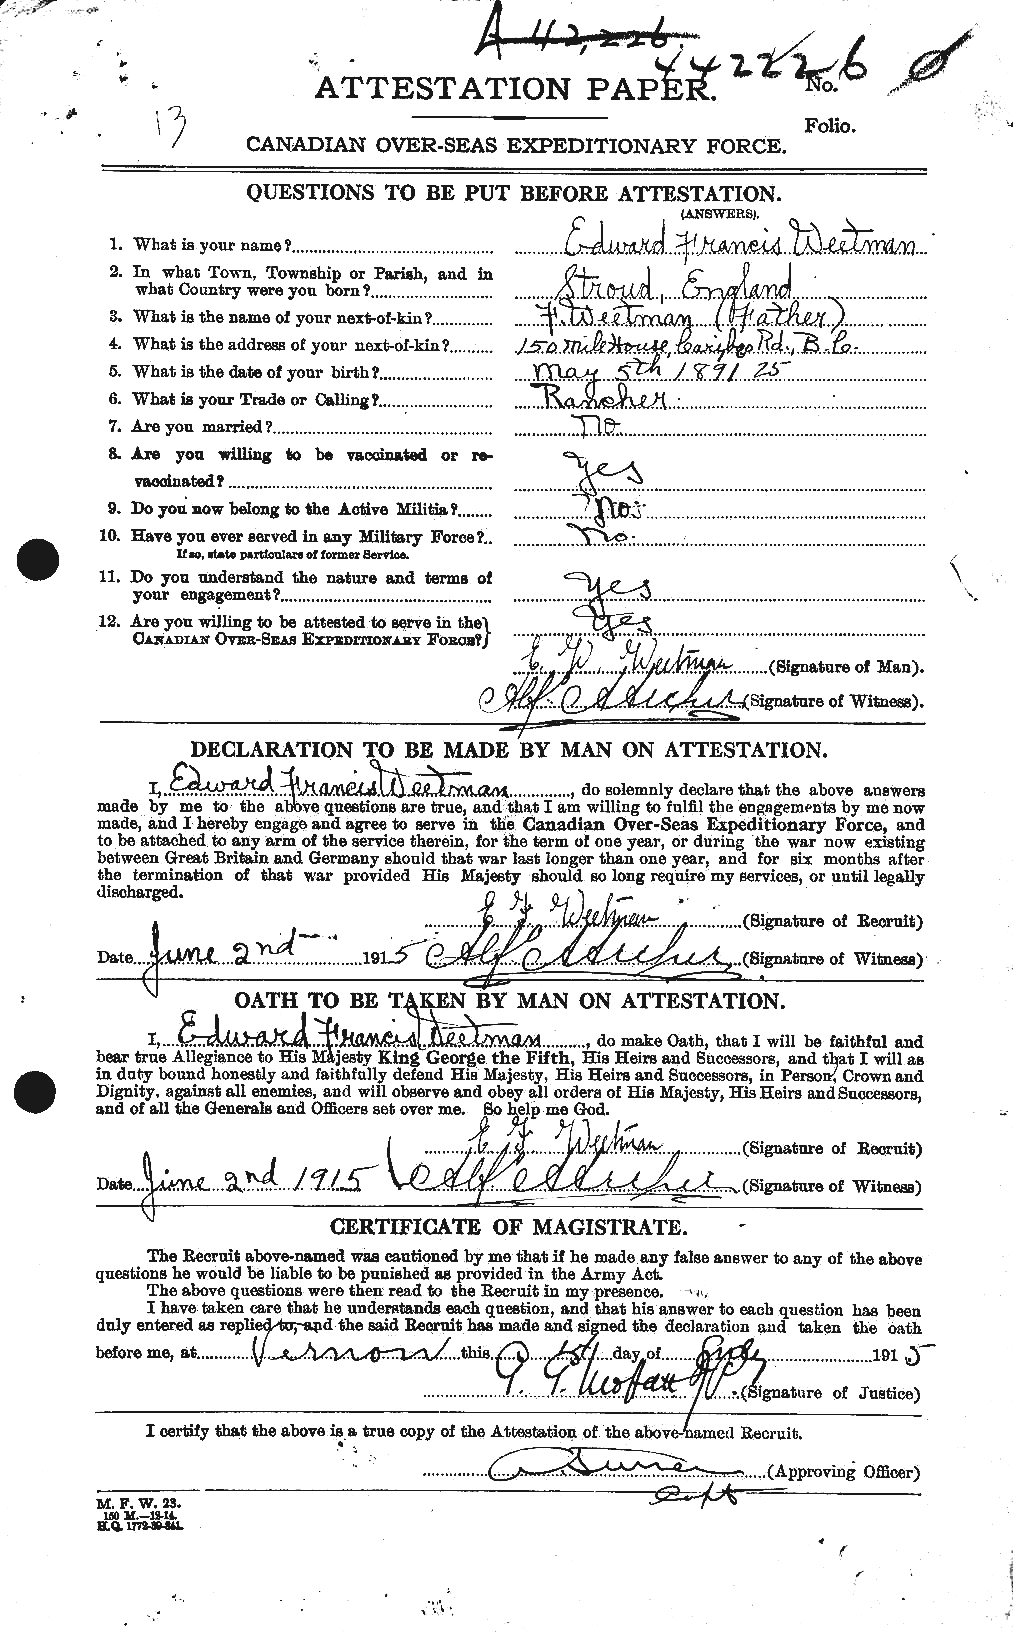 Personnel Records of the First World War - CEF 663568a